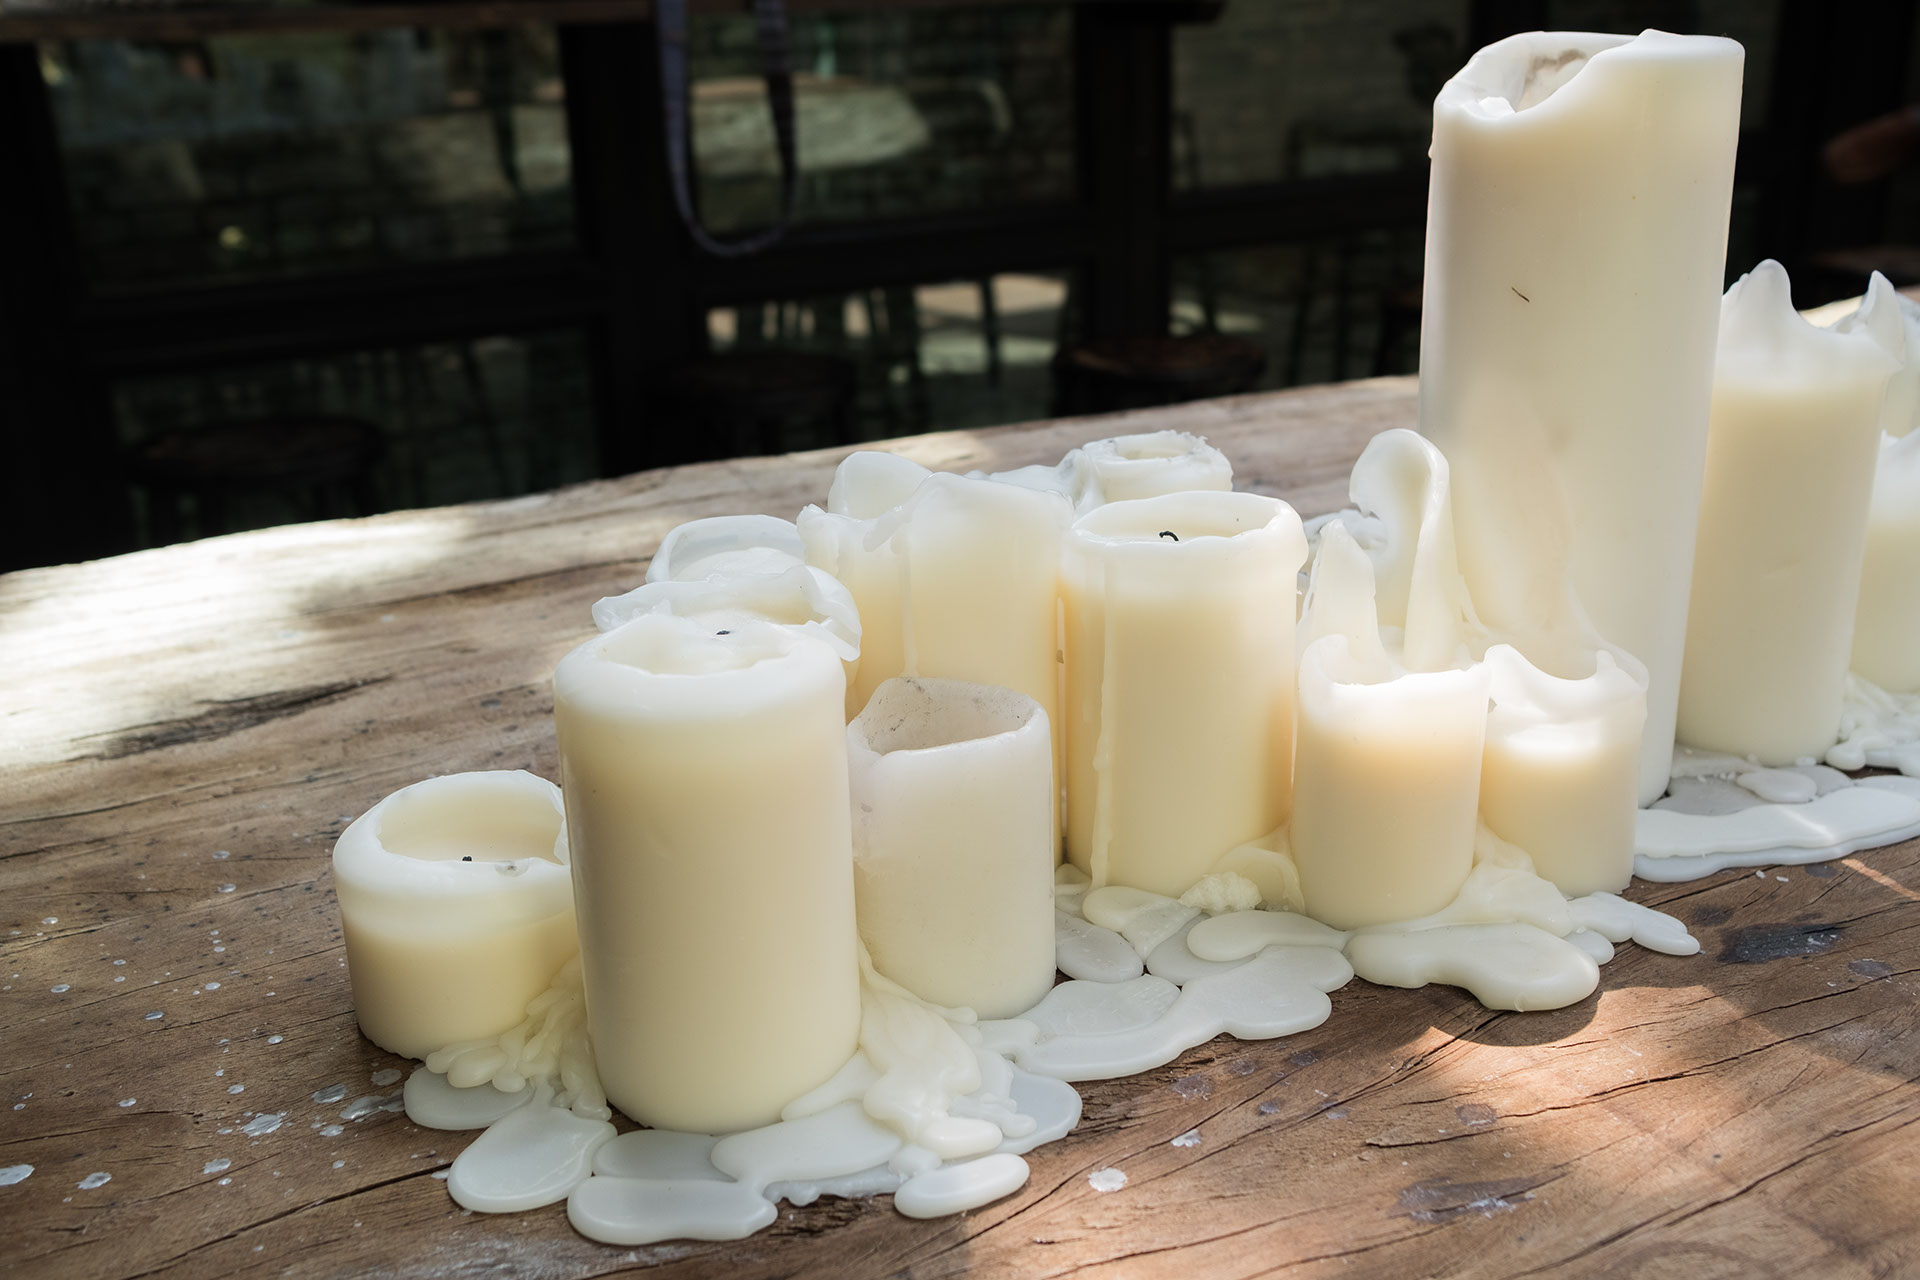 When Candles Attack: How to Remove Spilled Wax or Drips From Fabric - Racked